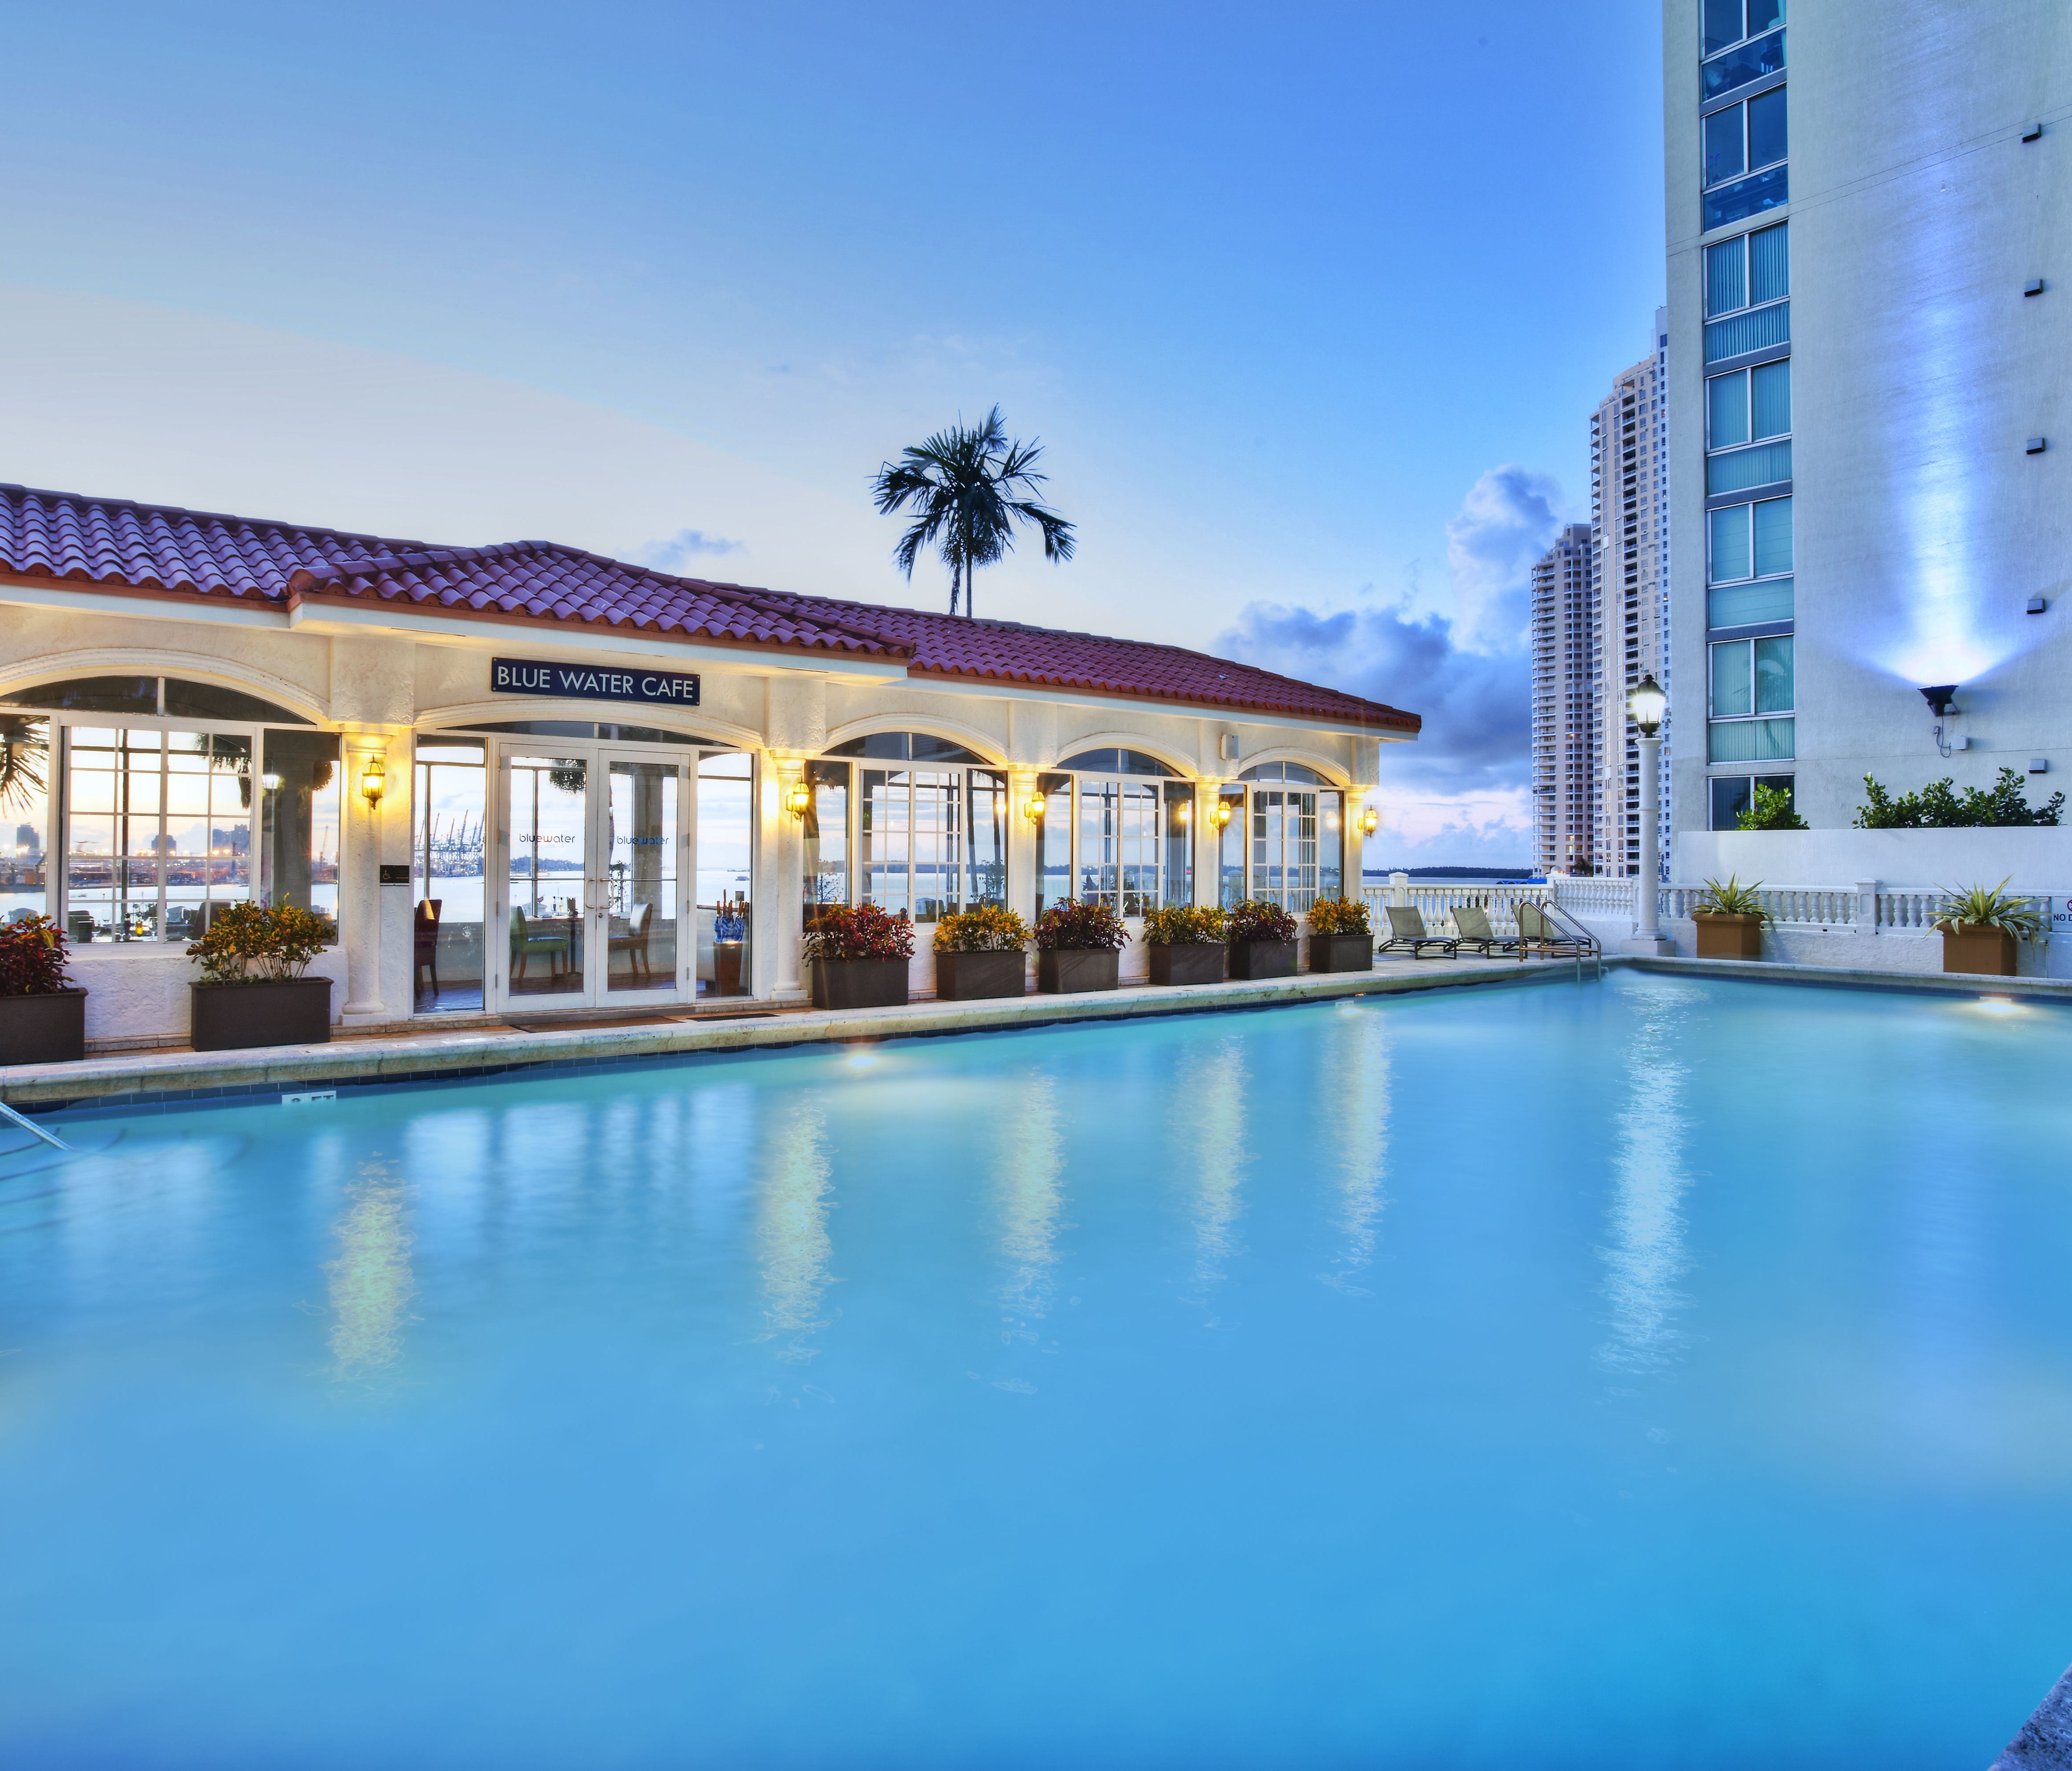 Downtown Miami hotels have gained in popularity in recent years. The InterContinental Miami made a strong showing in Expedia's list of top 20 most in demand hotels in Miami.